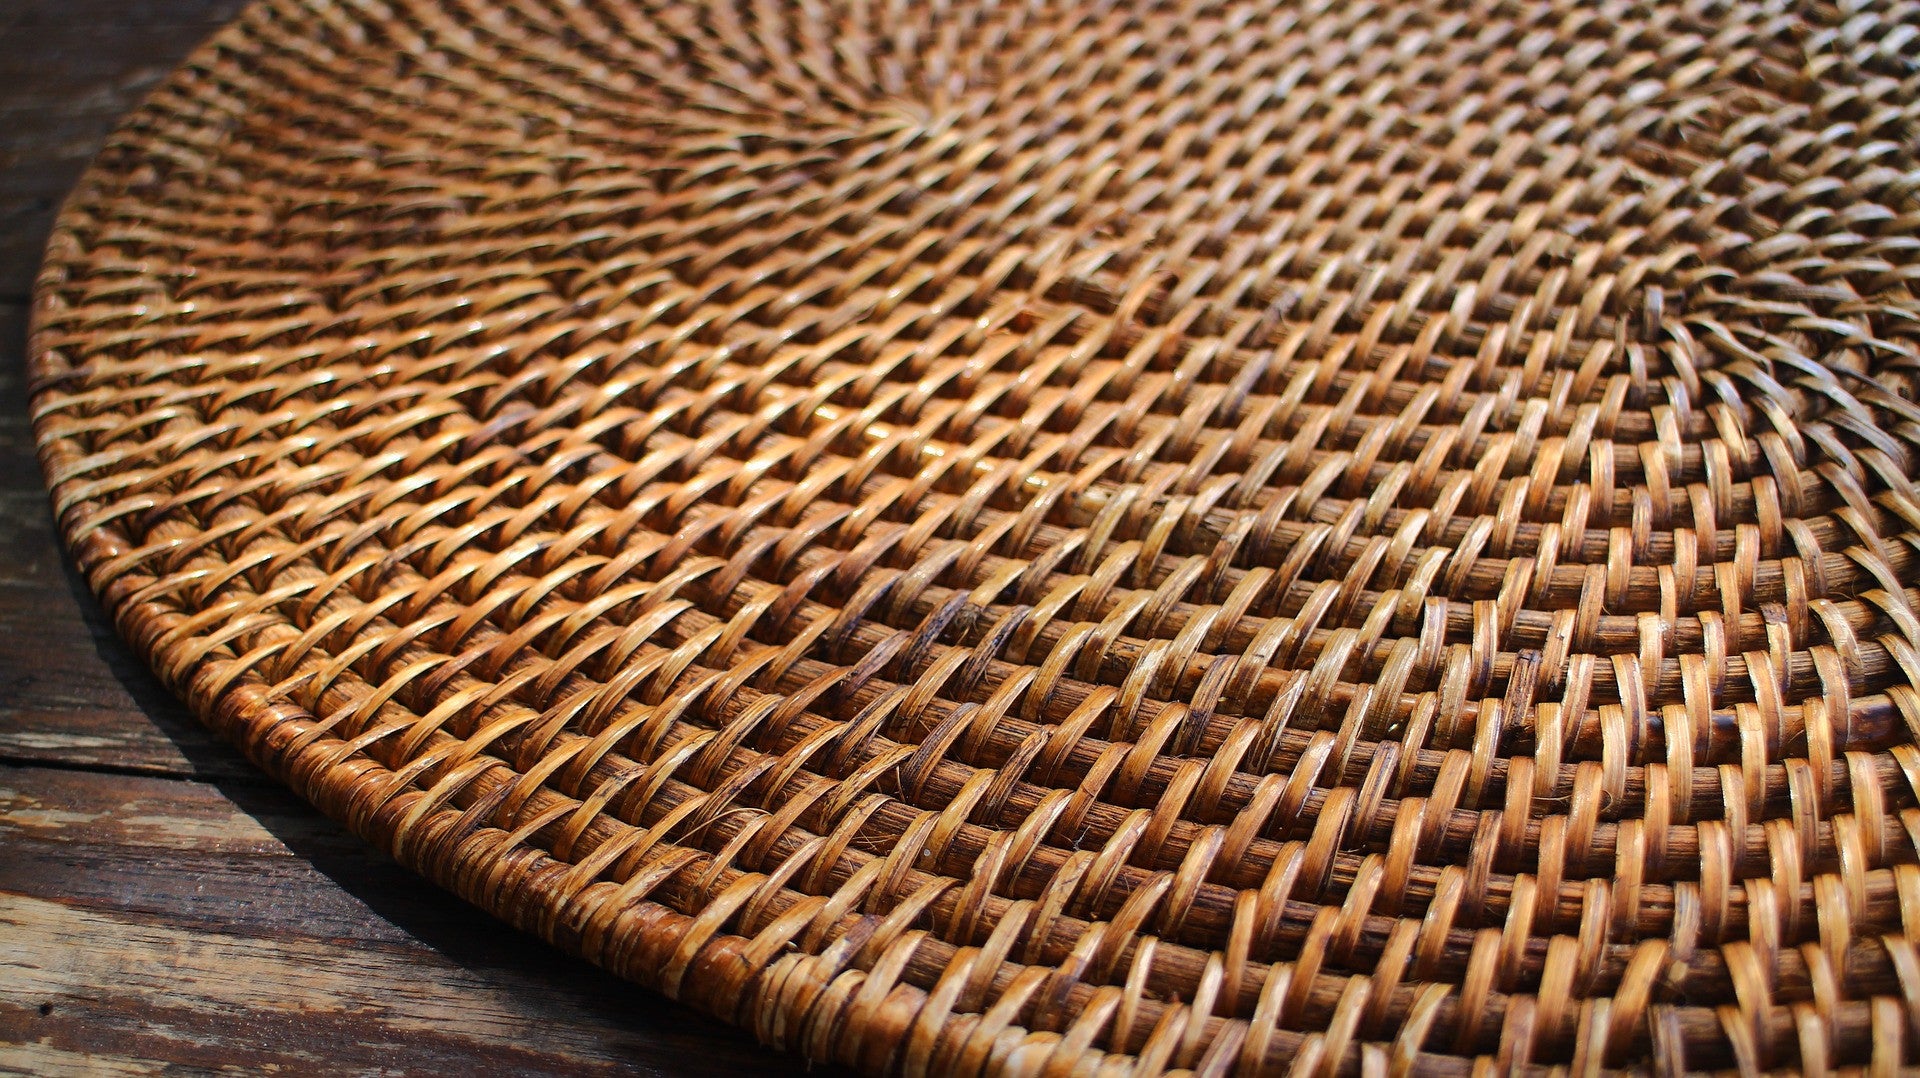 About Wicker and Rattan Casual Furniture from Sea Winds Trading Co.